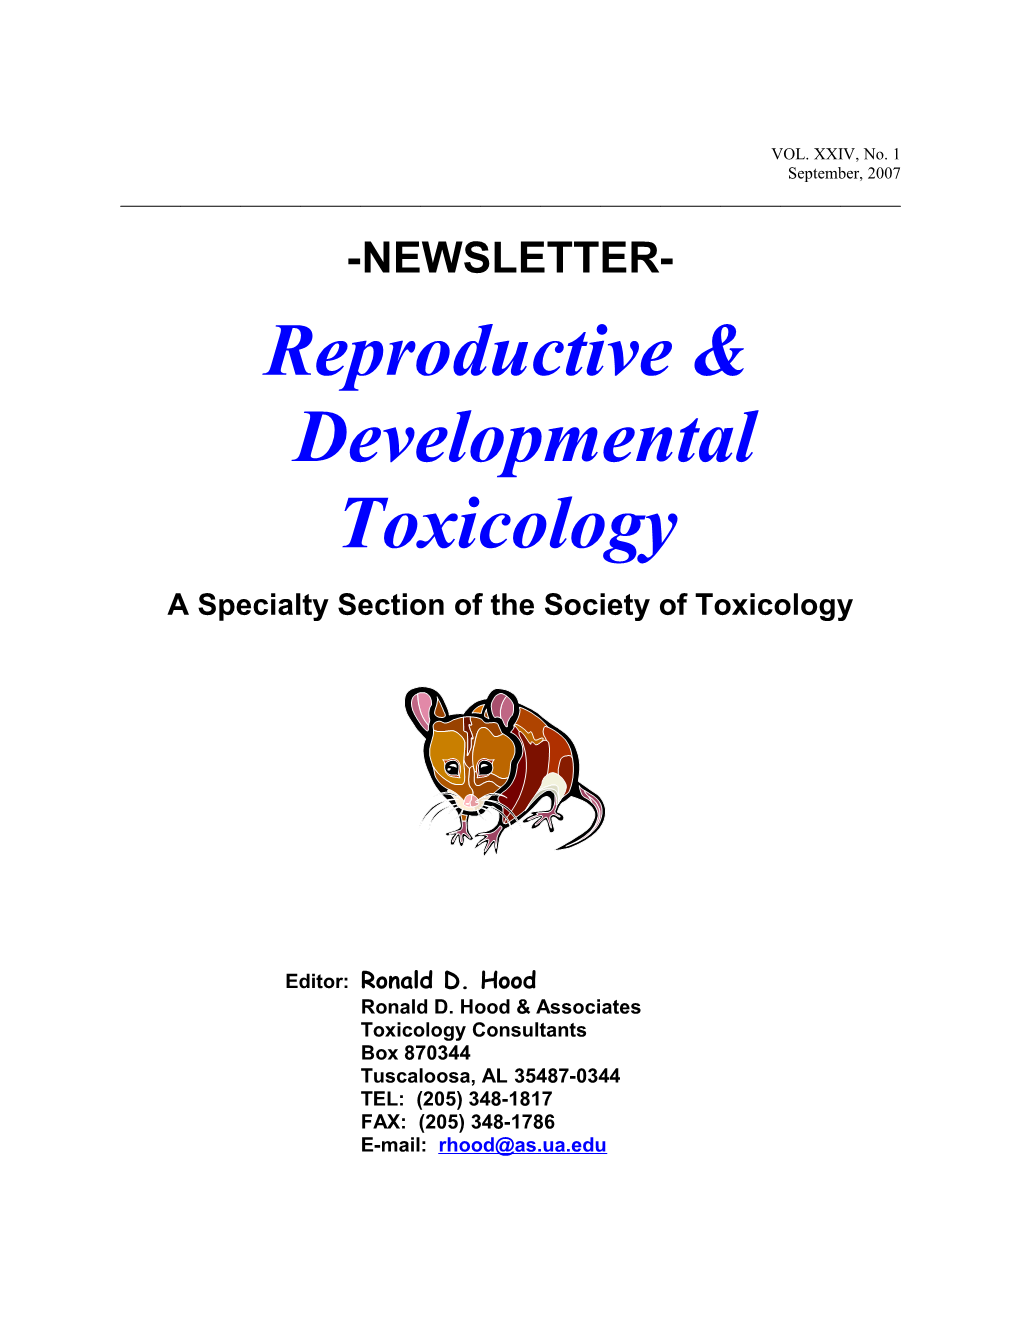 A Specialty Section of the Society of Toxicology